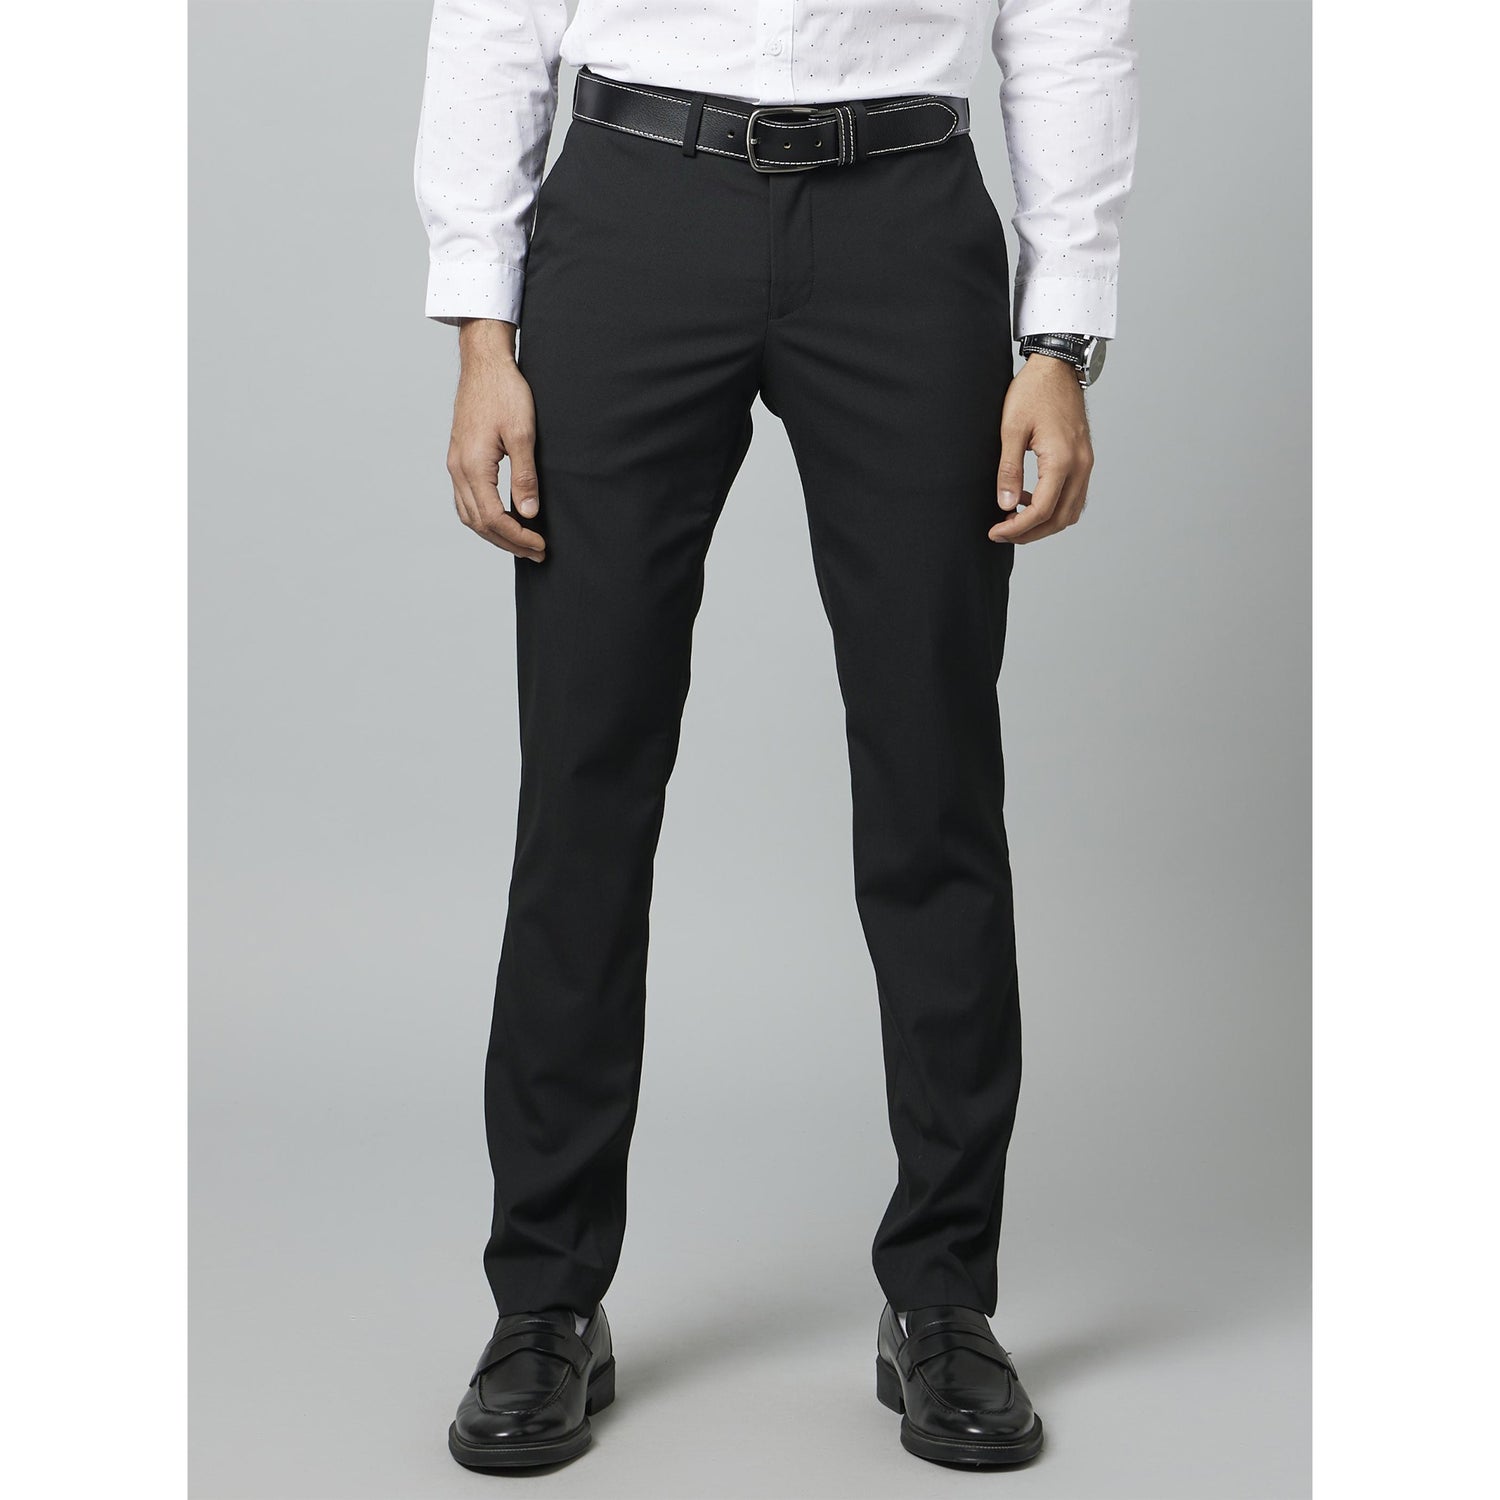 Black Tailored Slim Fit Mid-Rise Formal Trousers (BOAMAURY)